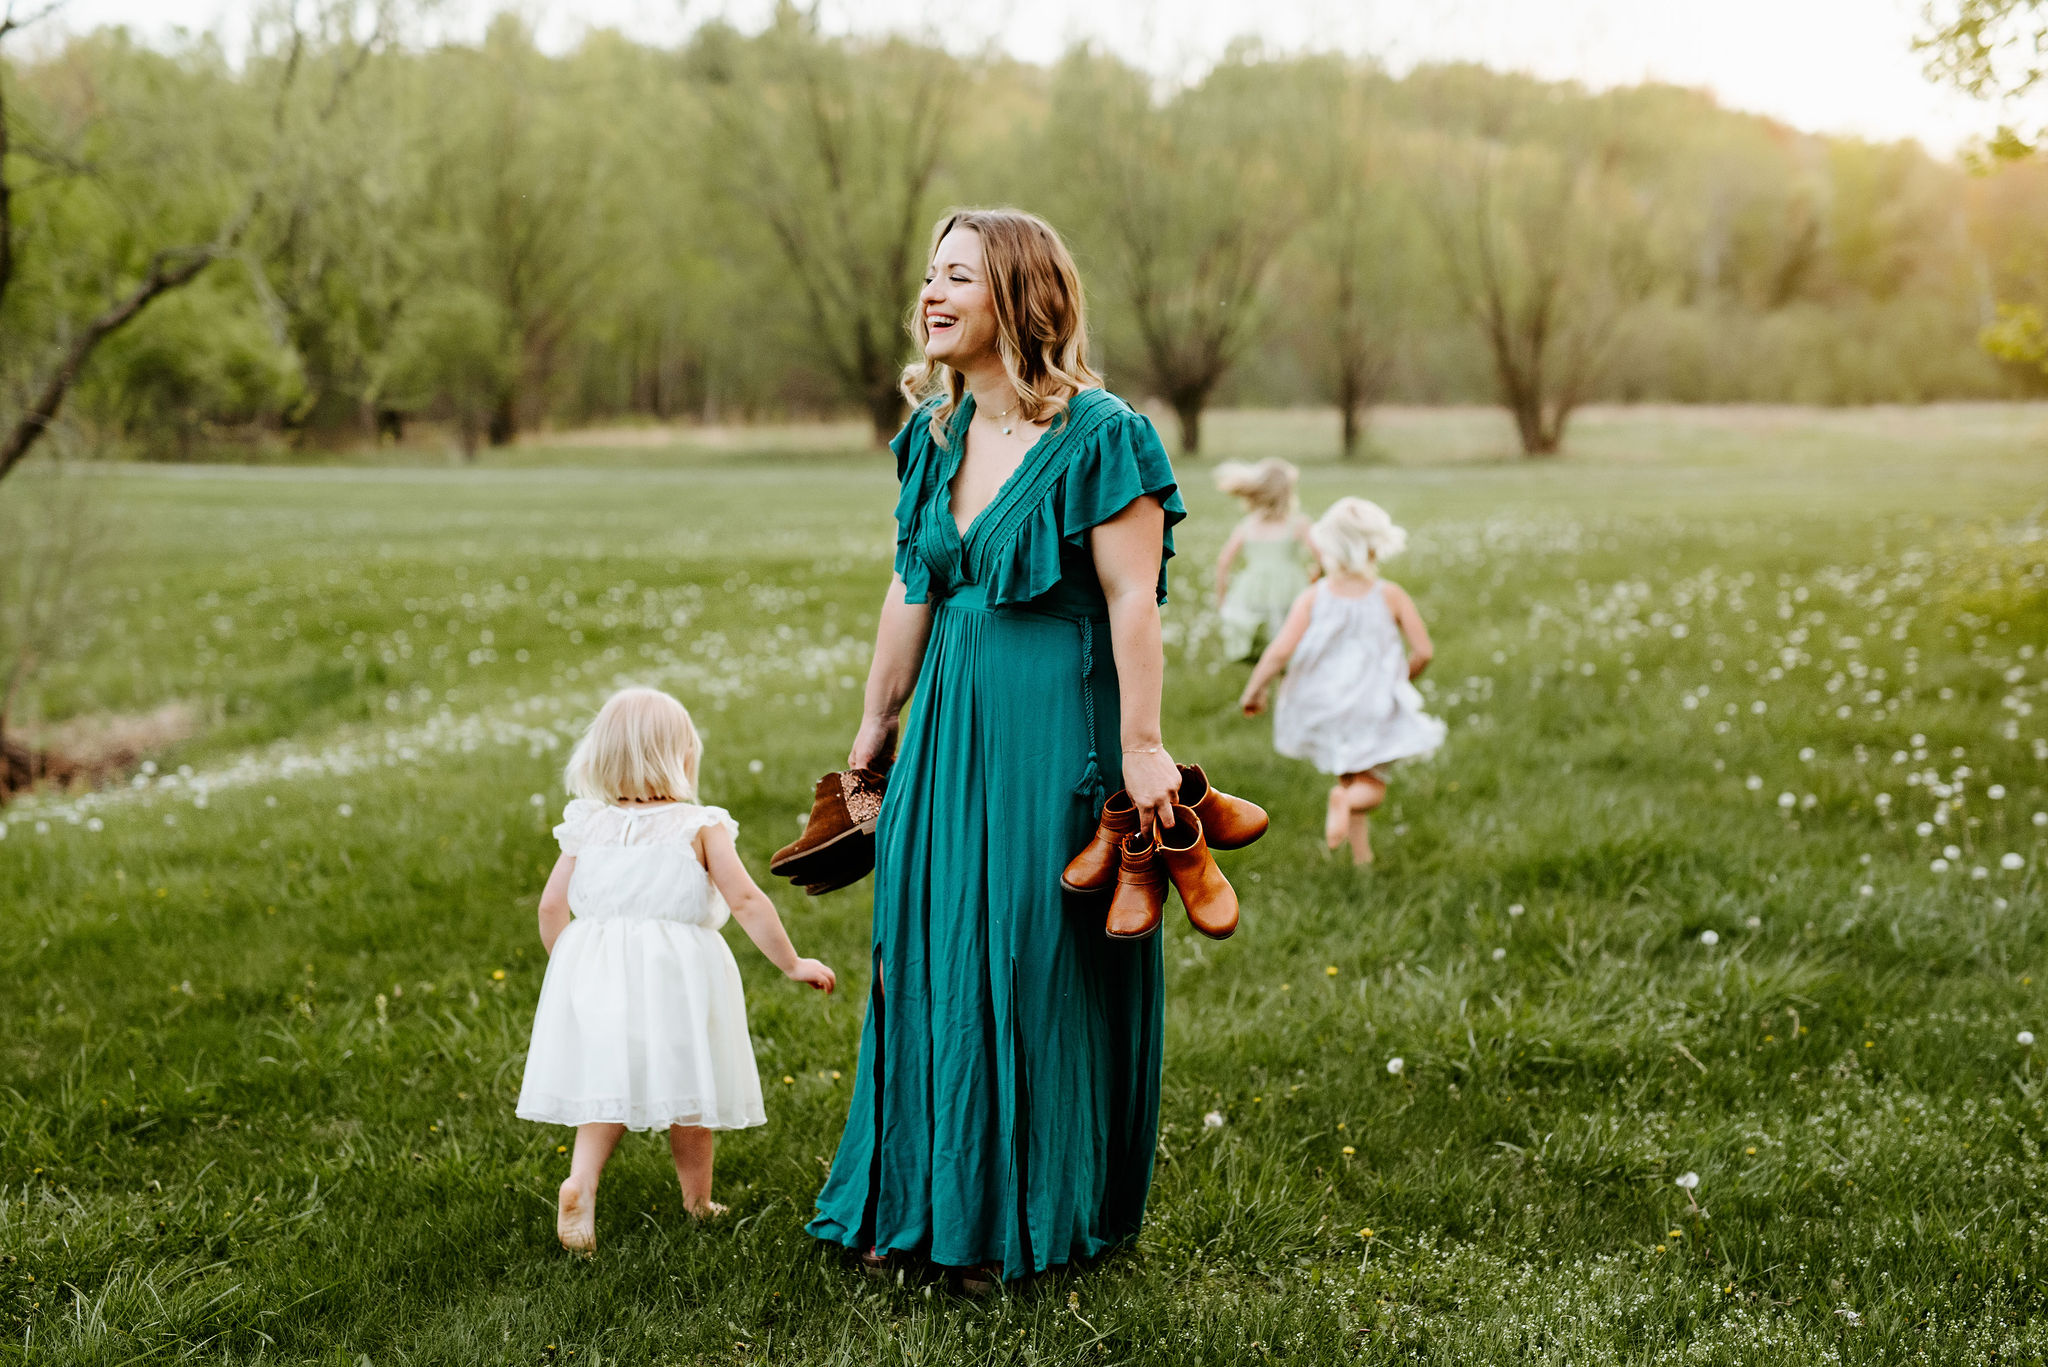 A mother stands in a field full of white dandelion flowers that have gone to seed. She is wearing a turquoise dress. She laughs while she holds several pairs of shoes. Three young girls are running away from her, through the flowers. The sun is setting in the background.